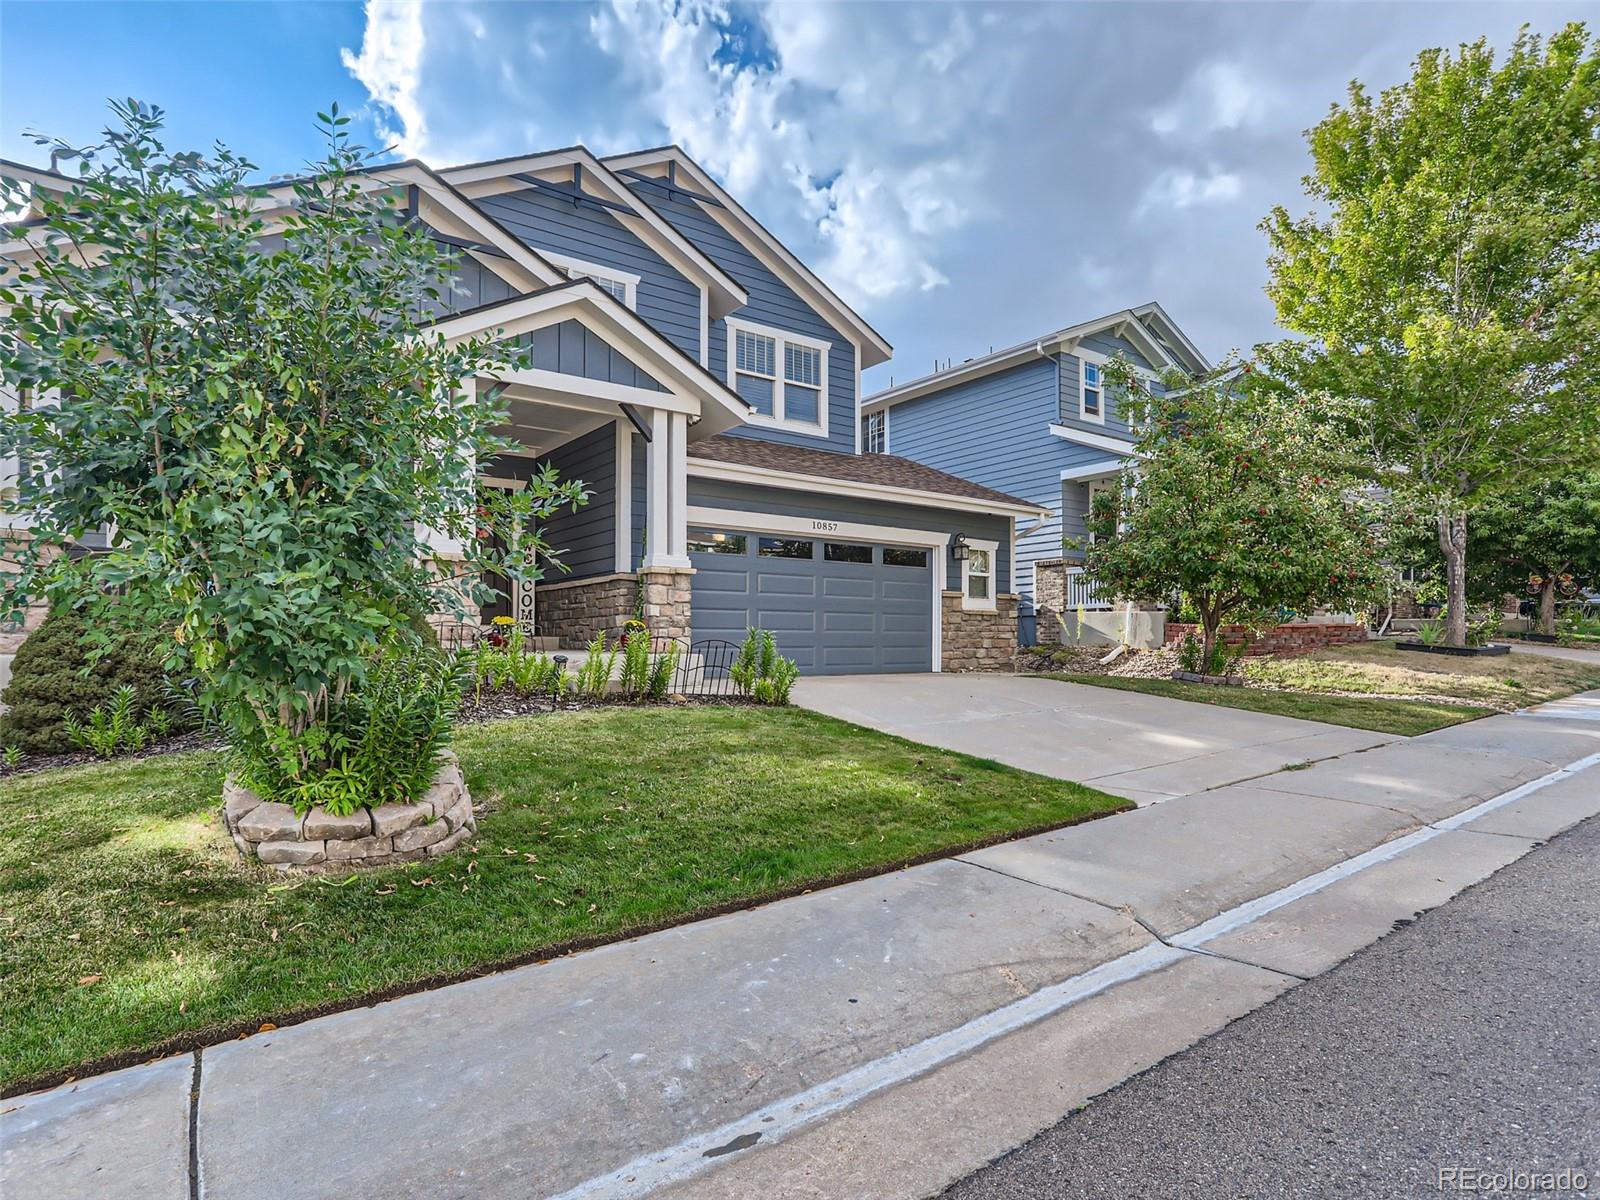 10857  hickory ridge street, Highlands Ranch sold home. Closed on 2024-01-26 for $815,000.